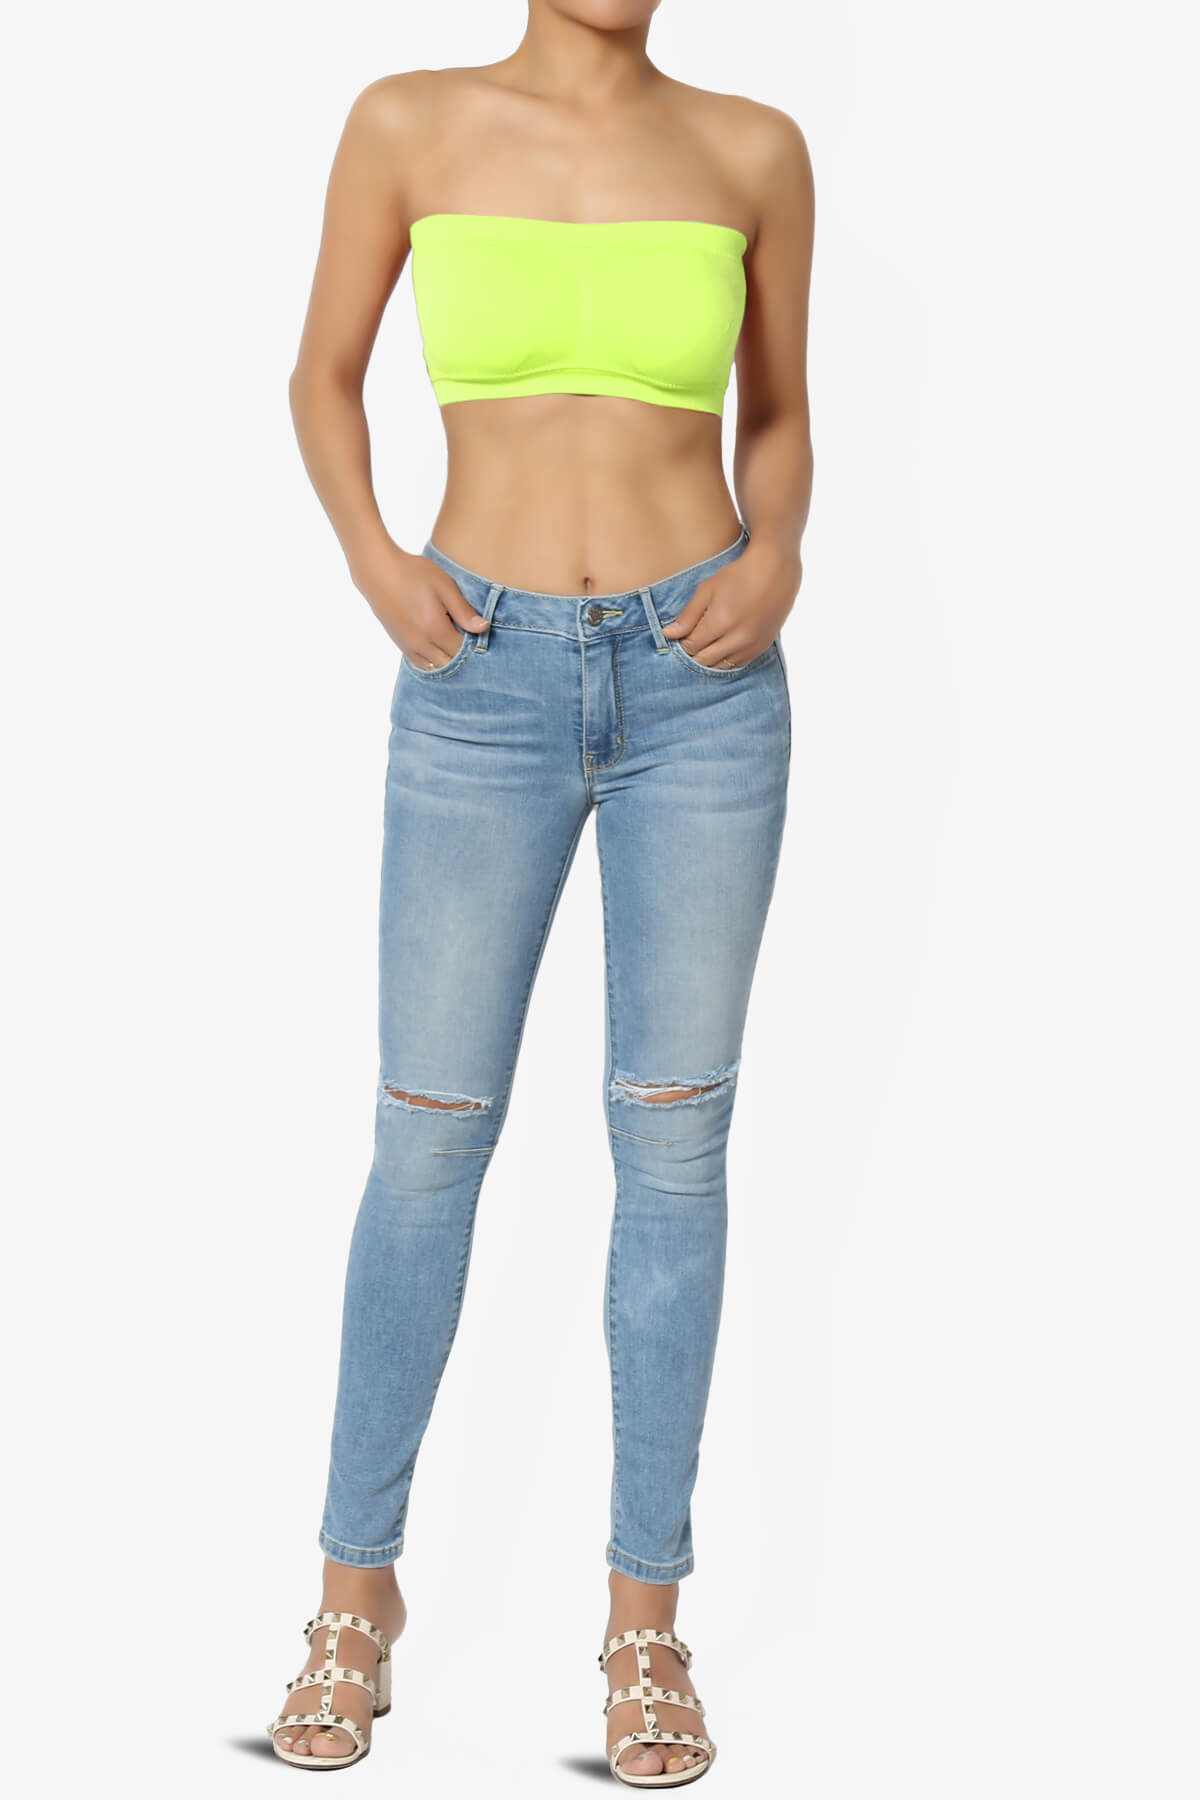 Candid Removable Pad Bandeau Bra Top NEON YELLOW_6